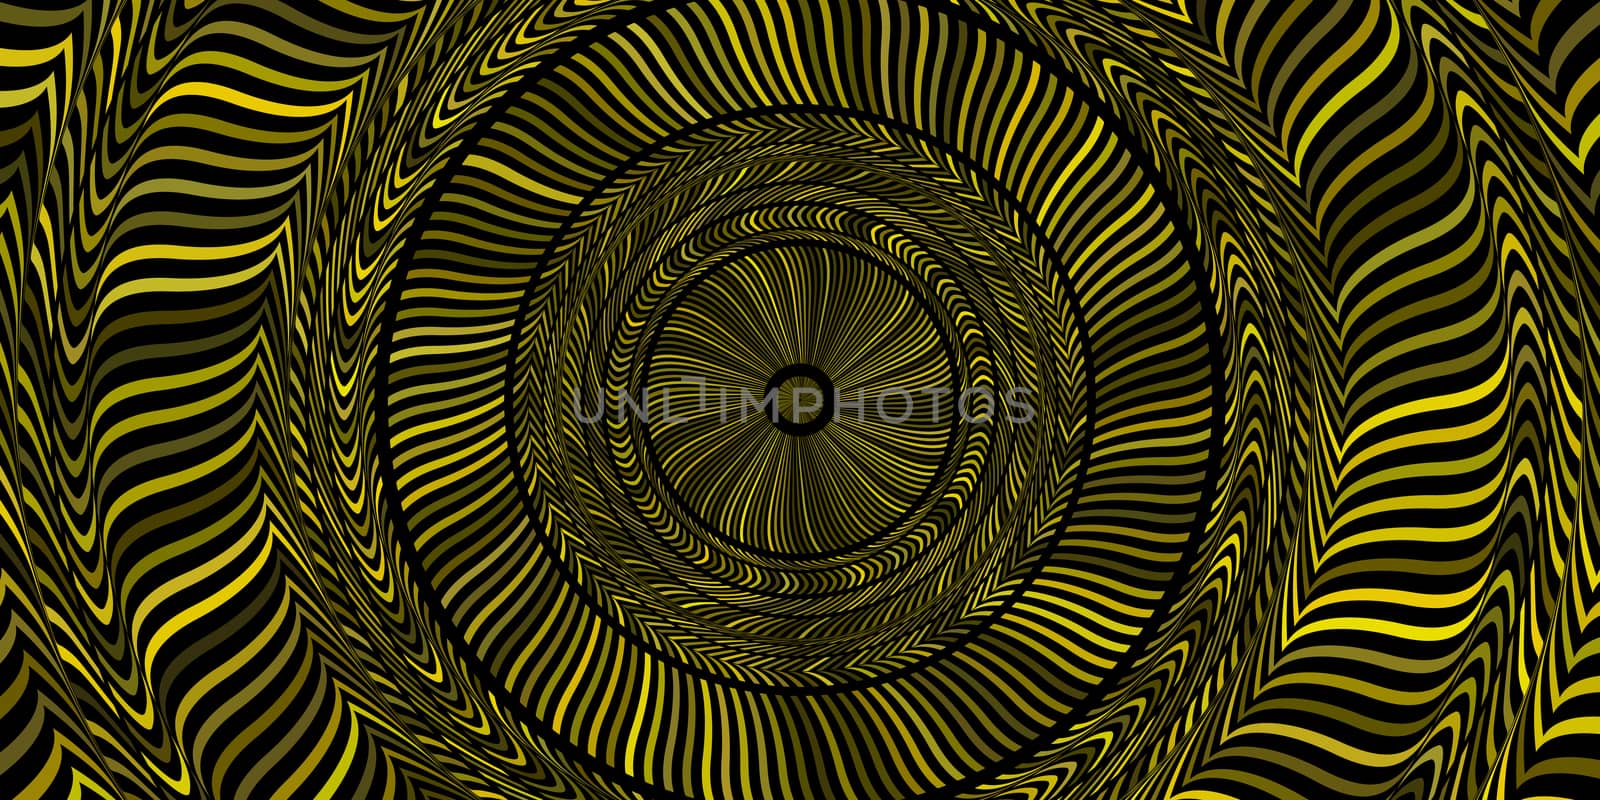 Golden Circles Art Action Background. Round Wheel Rhythm Backdrop. Center Concept. by sanches812